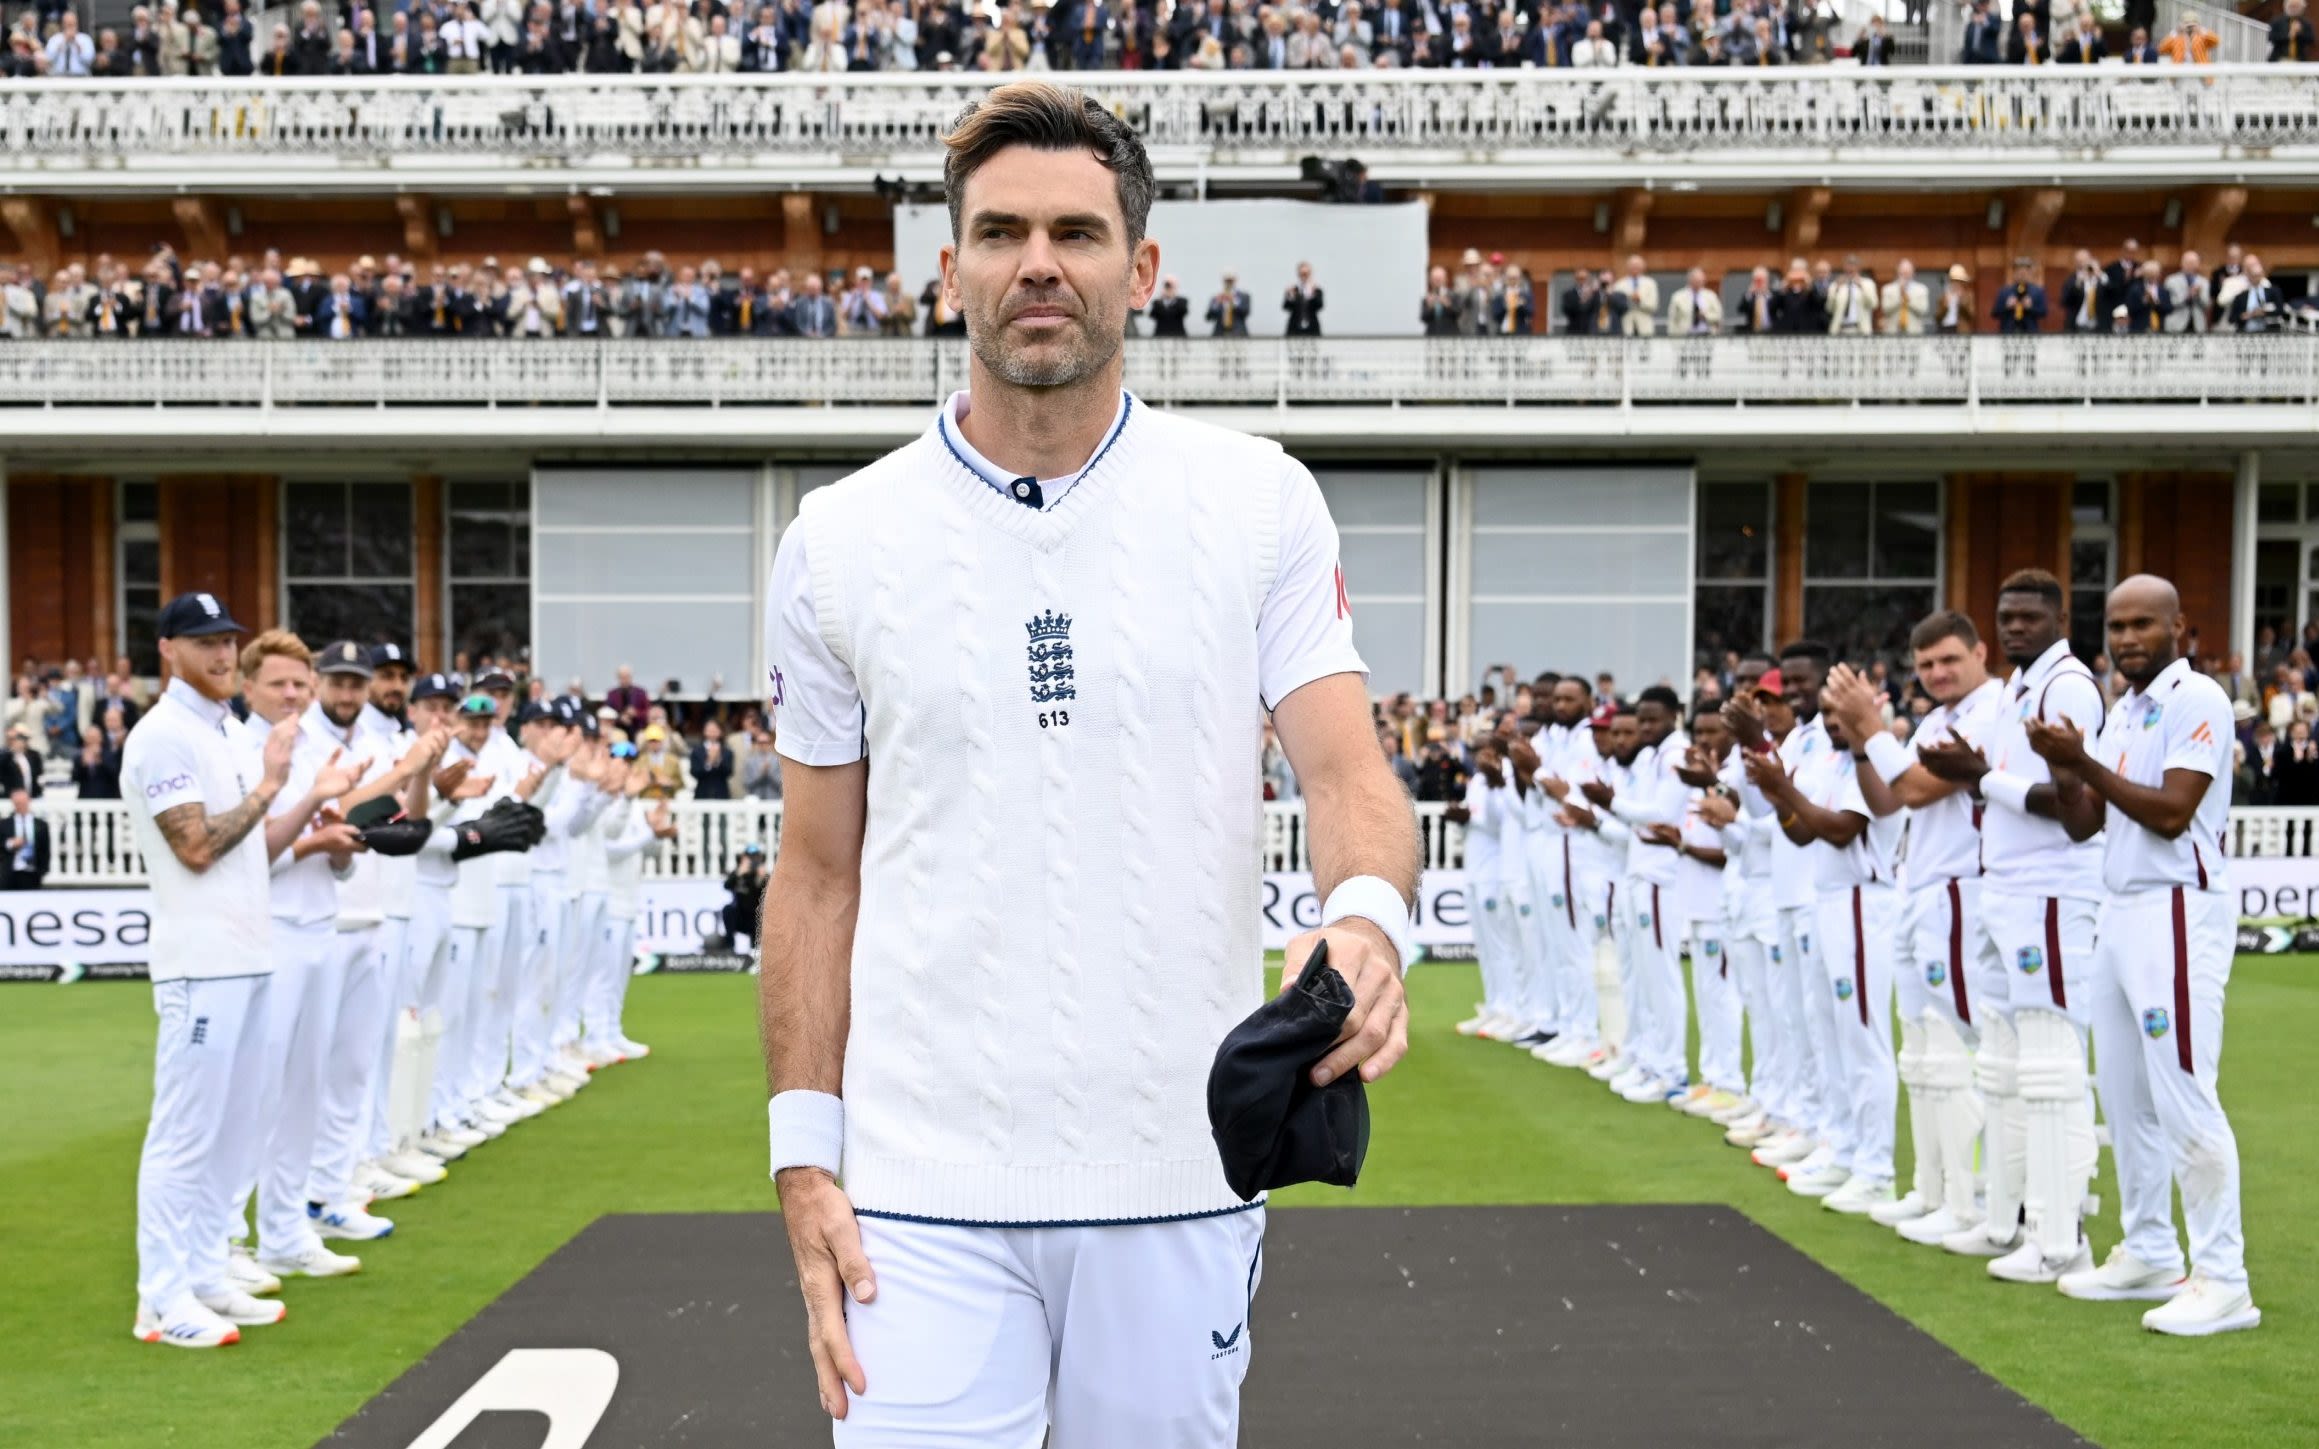 Watching James Anderson has been a privilege, but it is right to move on now